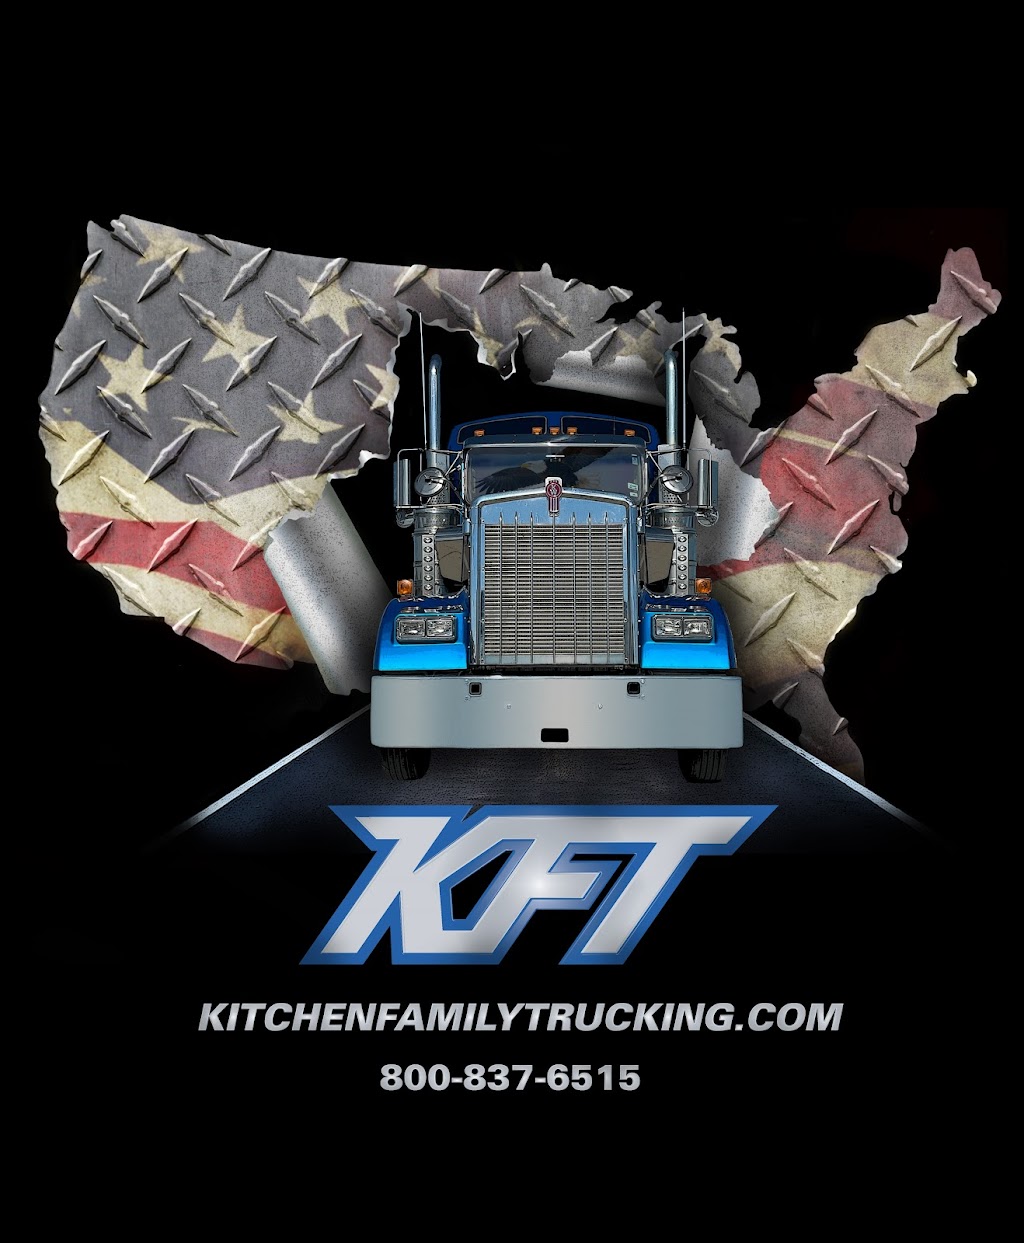 KITCHEN FAMILY TRUCKING | 6302 Co Rd 5, Leipsic, OH 45856 | Phone: (800) 837-6515